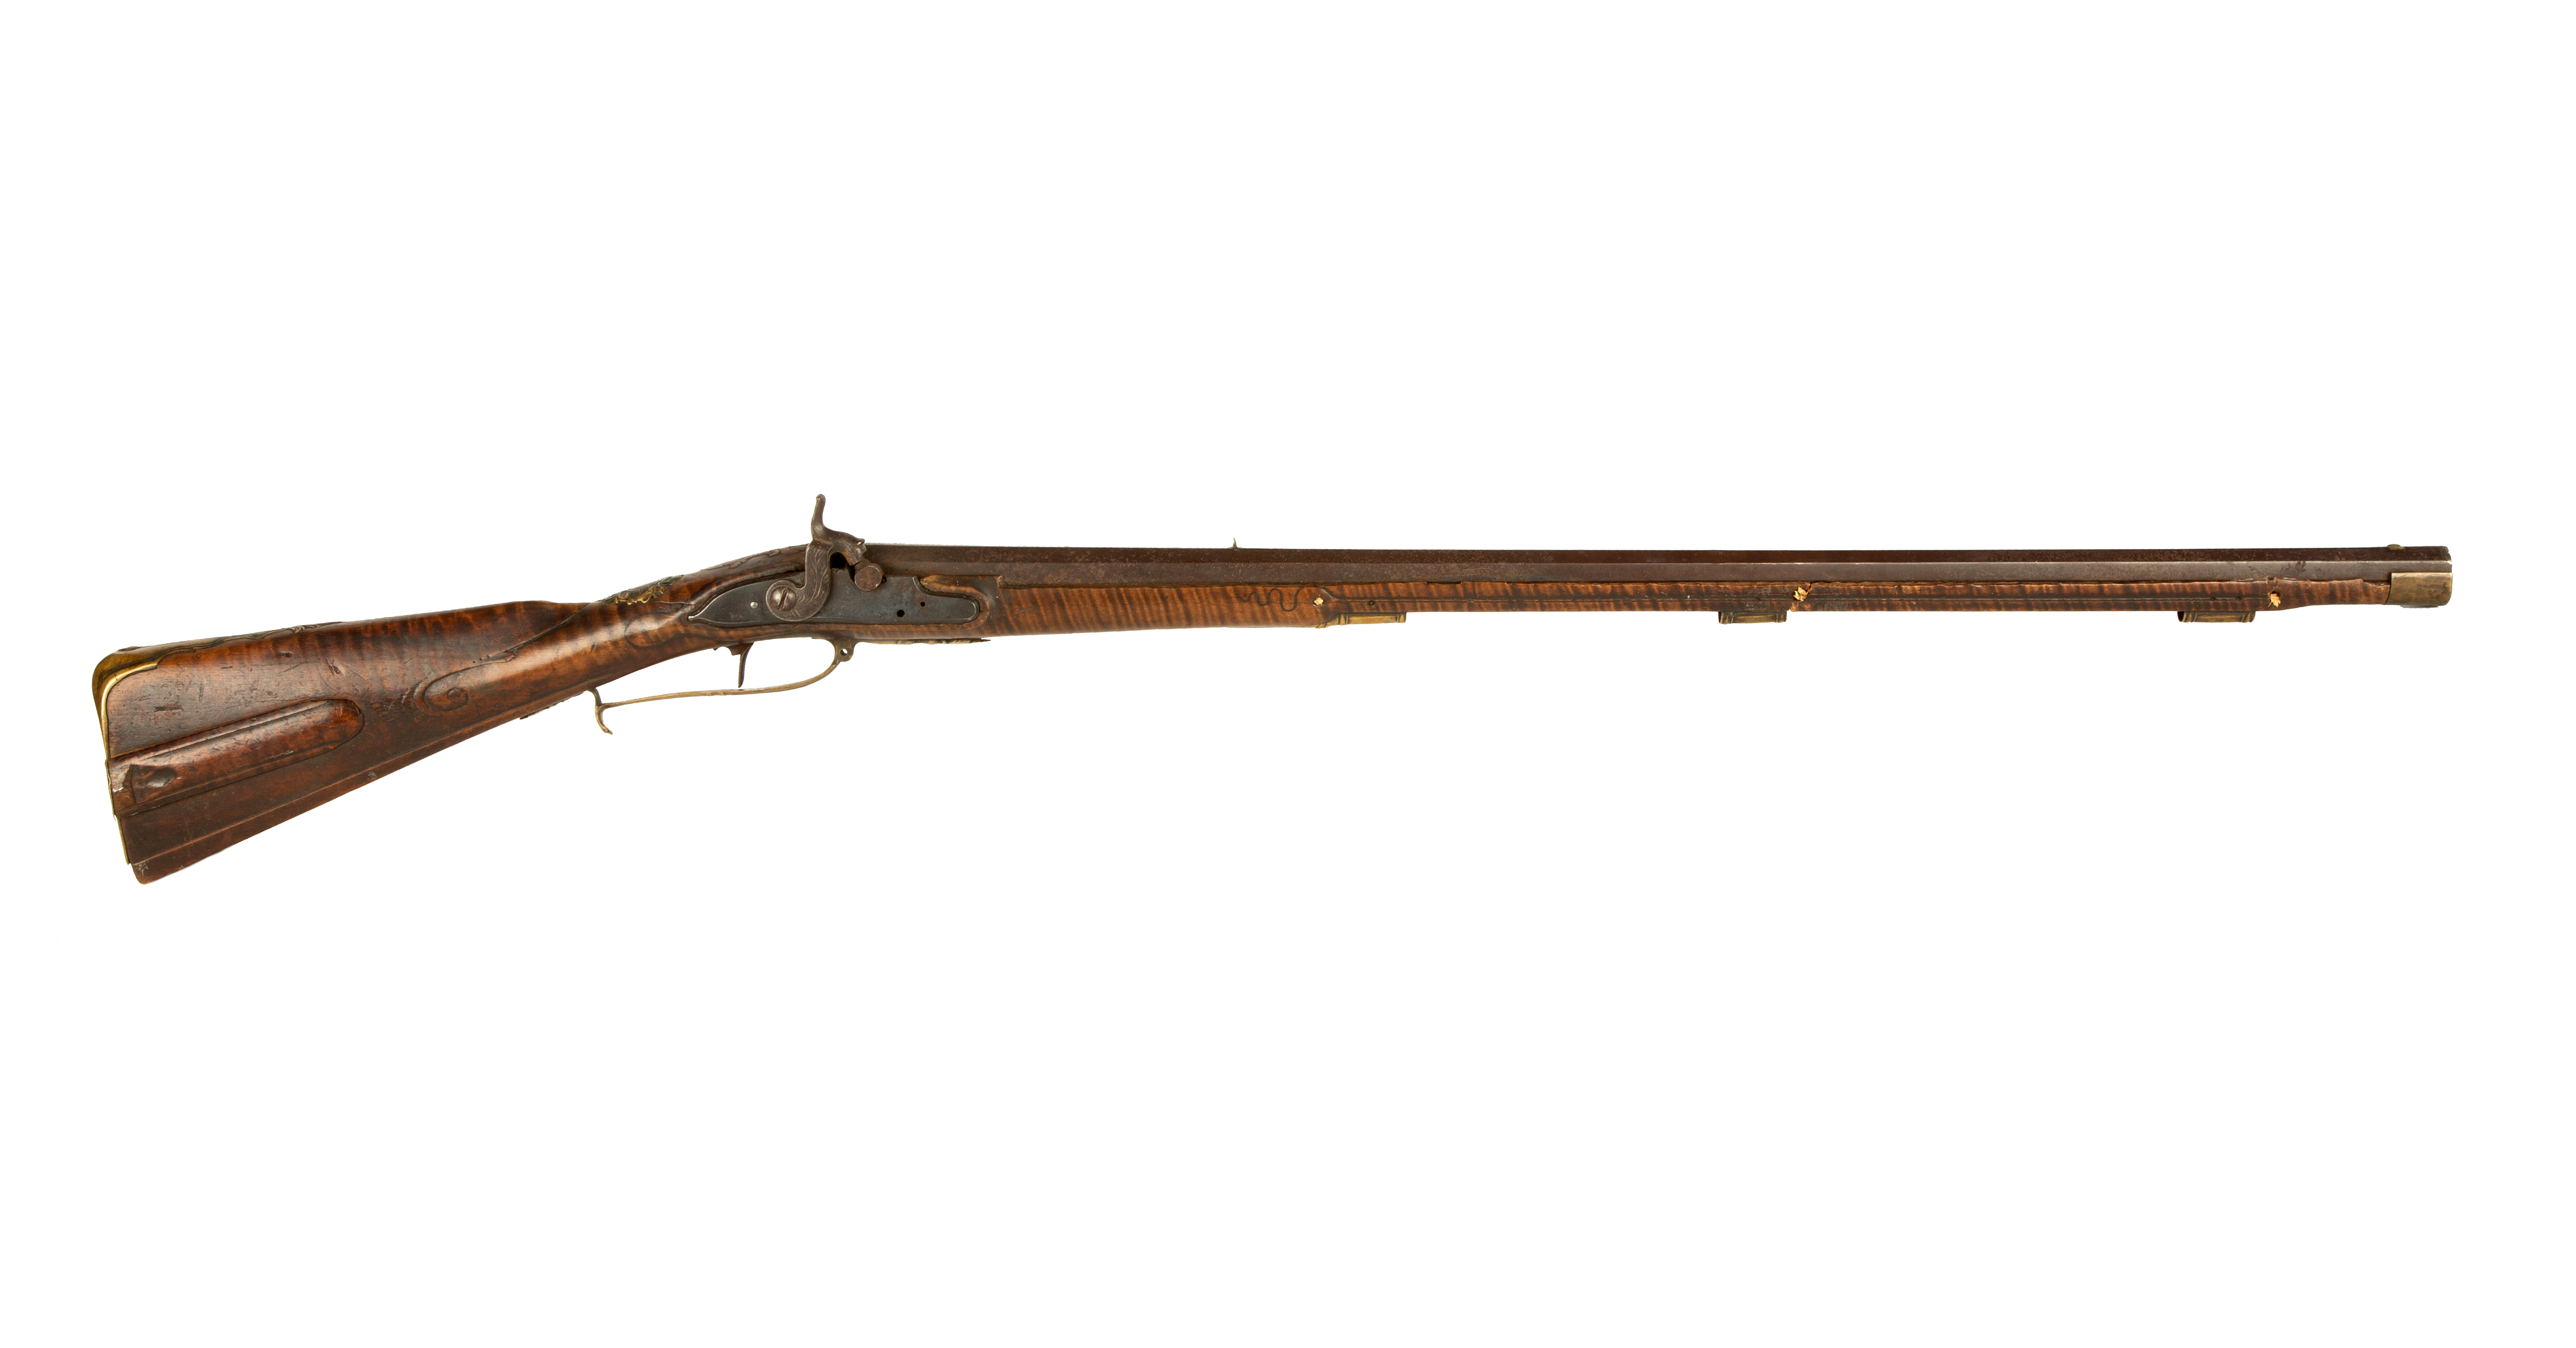 Rare Rochester Historical Society rifle fetches record $306,000 at